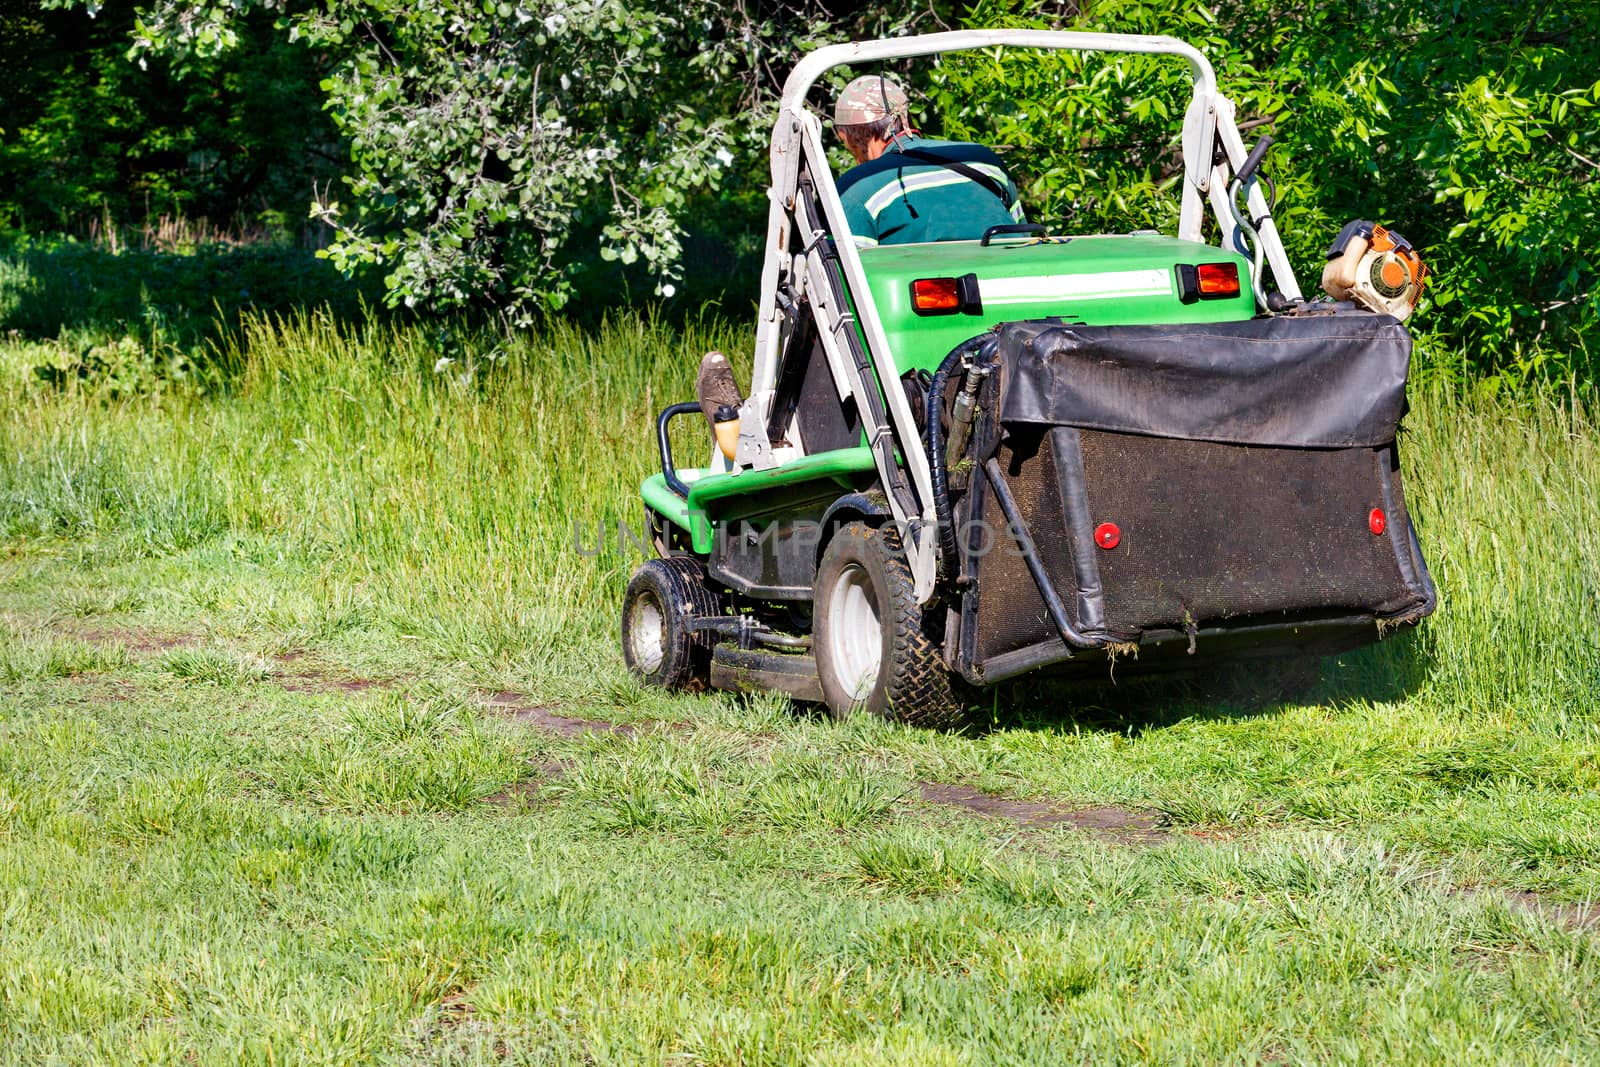 A utility service worker mows tall grass in an overgrown garden with a professional lawn mower on a clear sunny day, copy space.